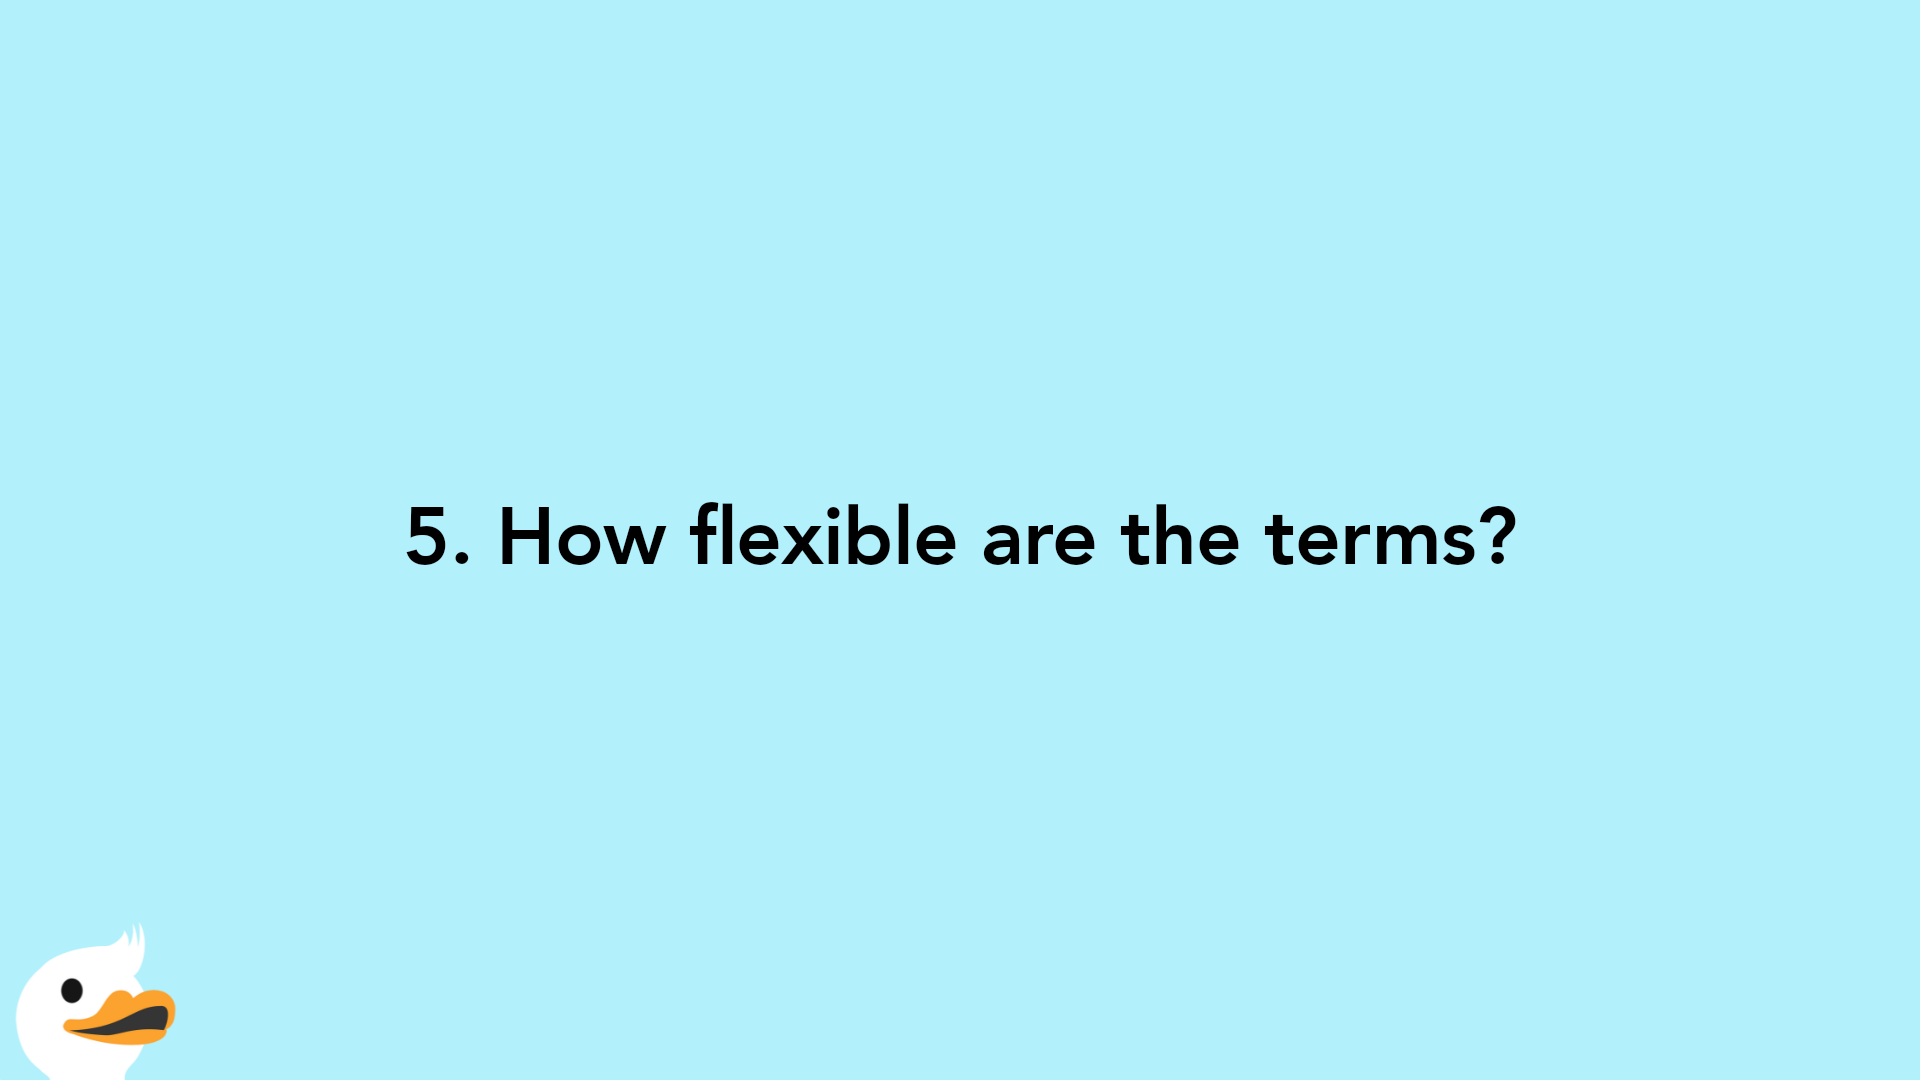 5. How flexible are the terms?